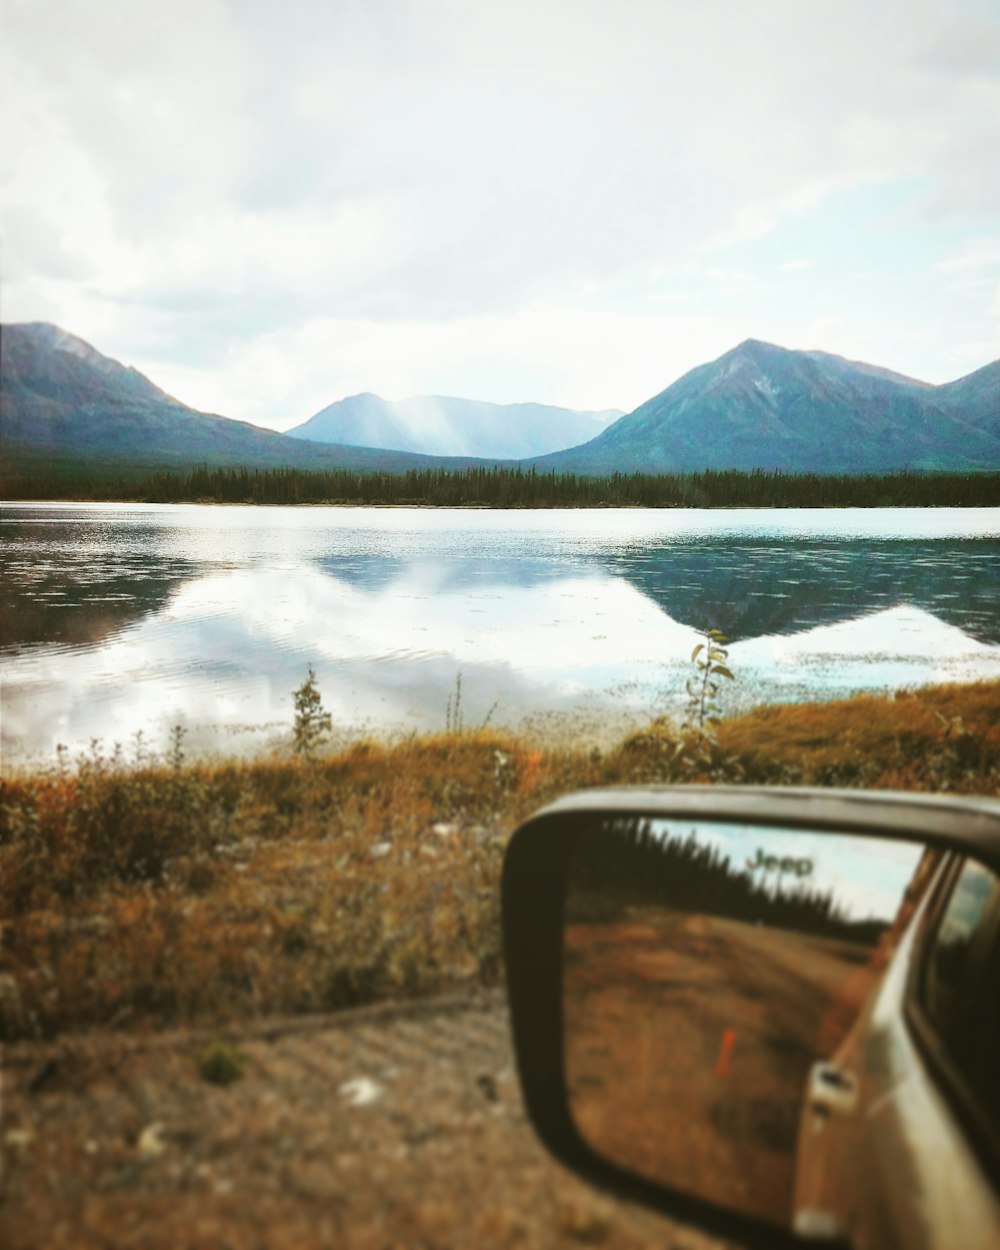 depth photography of car side mirror with a scene of body of water near mountains